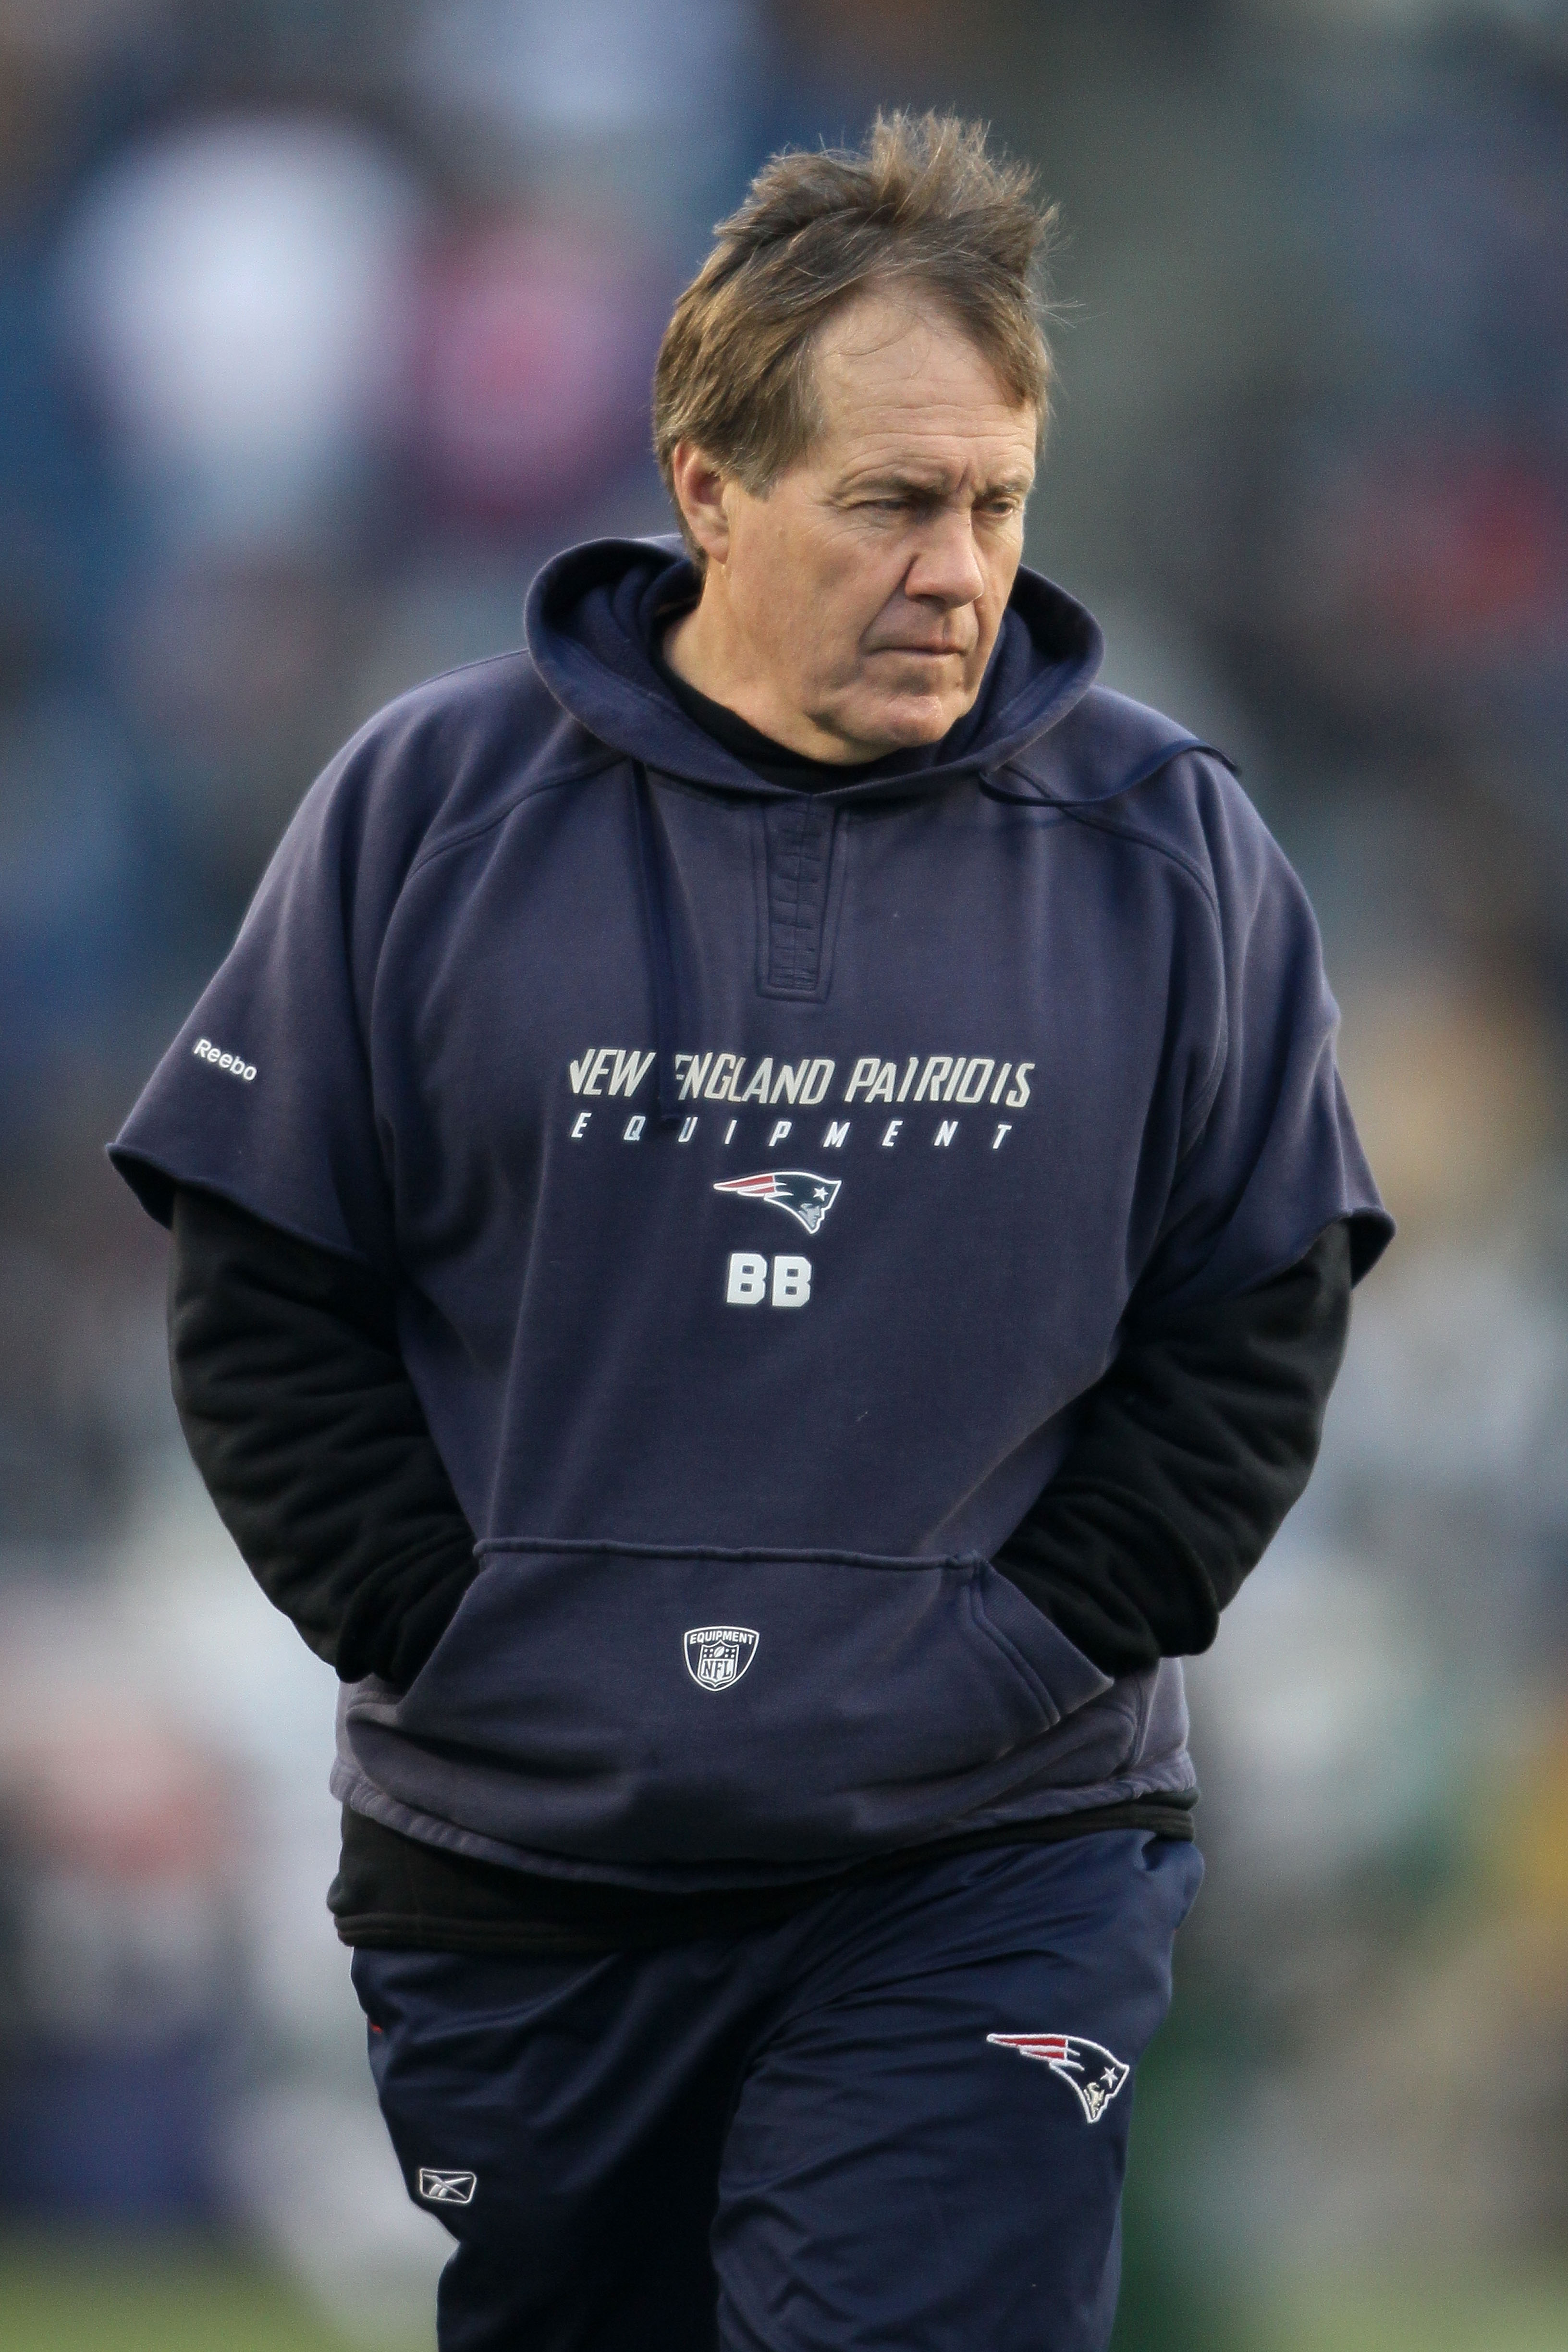 FOXBORO, MA - JANUARY 16:  Head coach Bill Belichick of the New England Patriots stands on the field during their 2011 AFC divisional playoff game against the New York Jets at Gillette Stadium on January 16, 2011 in Foxboro, Massachusetts.  (Photo by Elsa